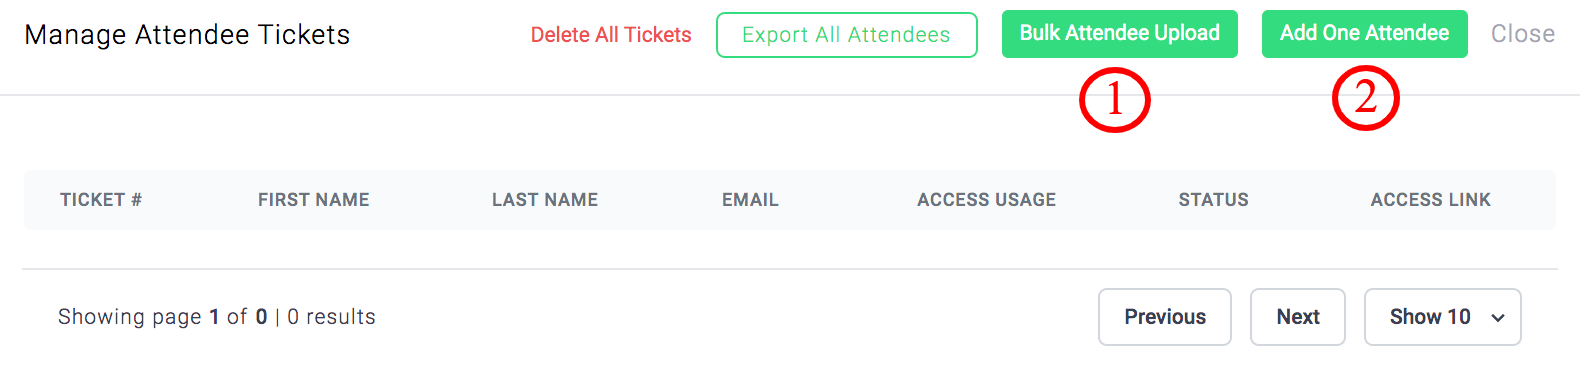 ManageTickets.png